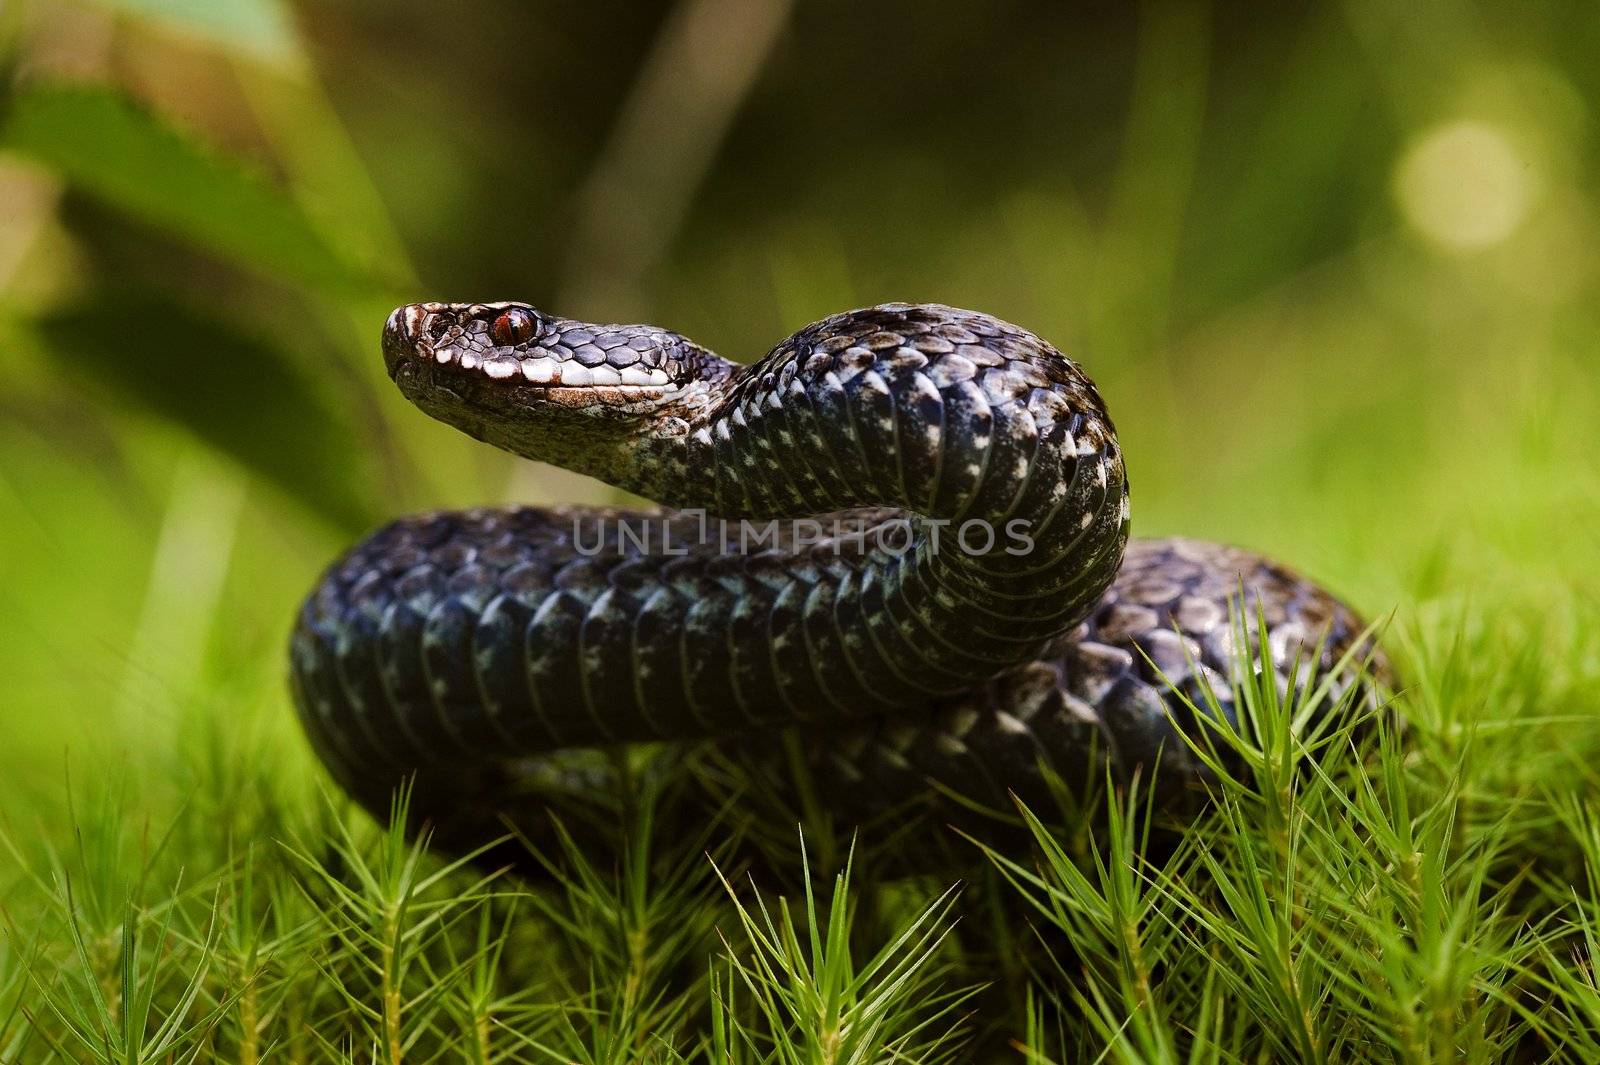 Vipera berus, the common European adder or common European viper, is a venomous viper species that is extremely widespread and can be found throughout most of Western Europe and all the way to Far East Asia.